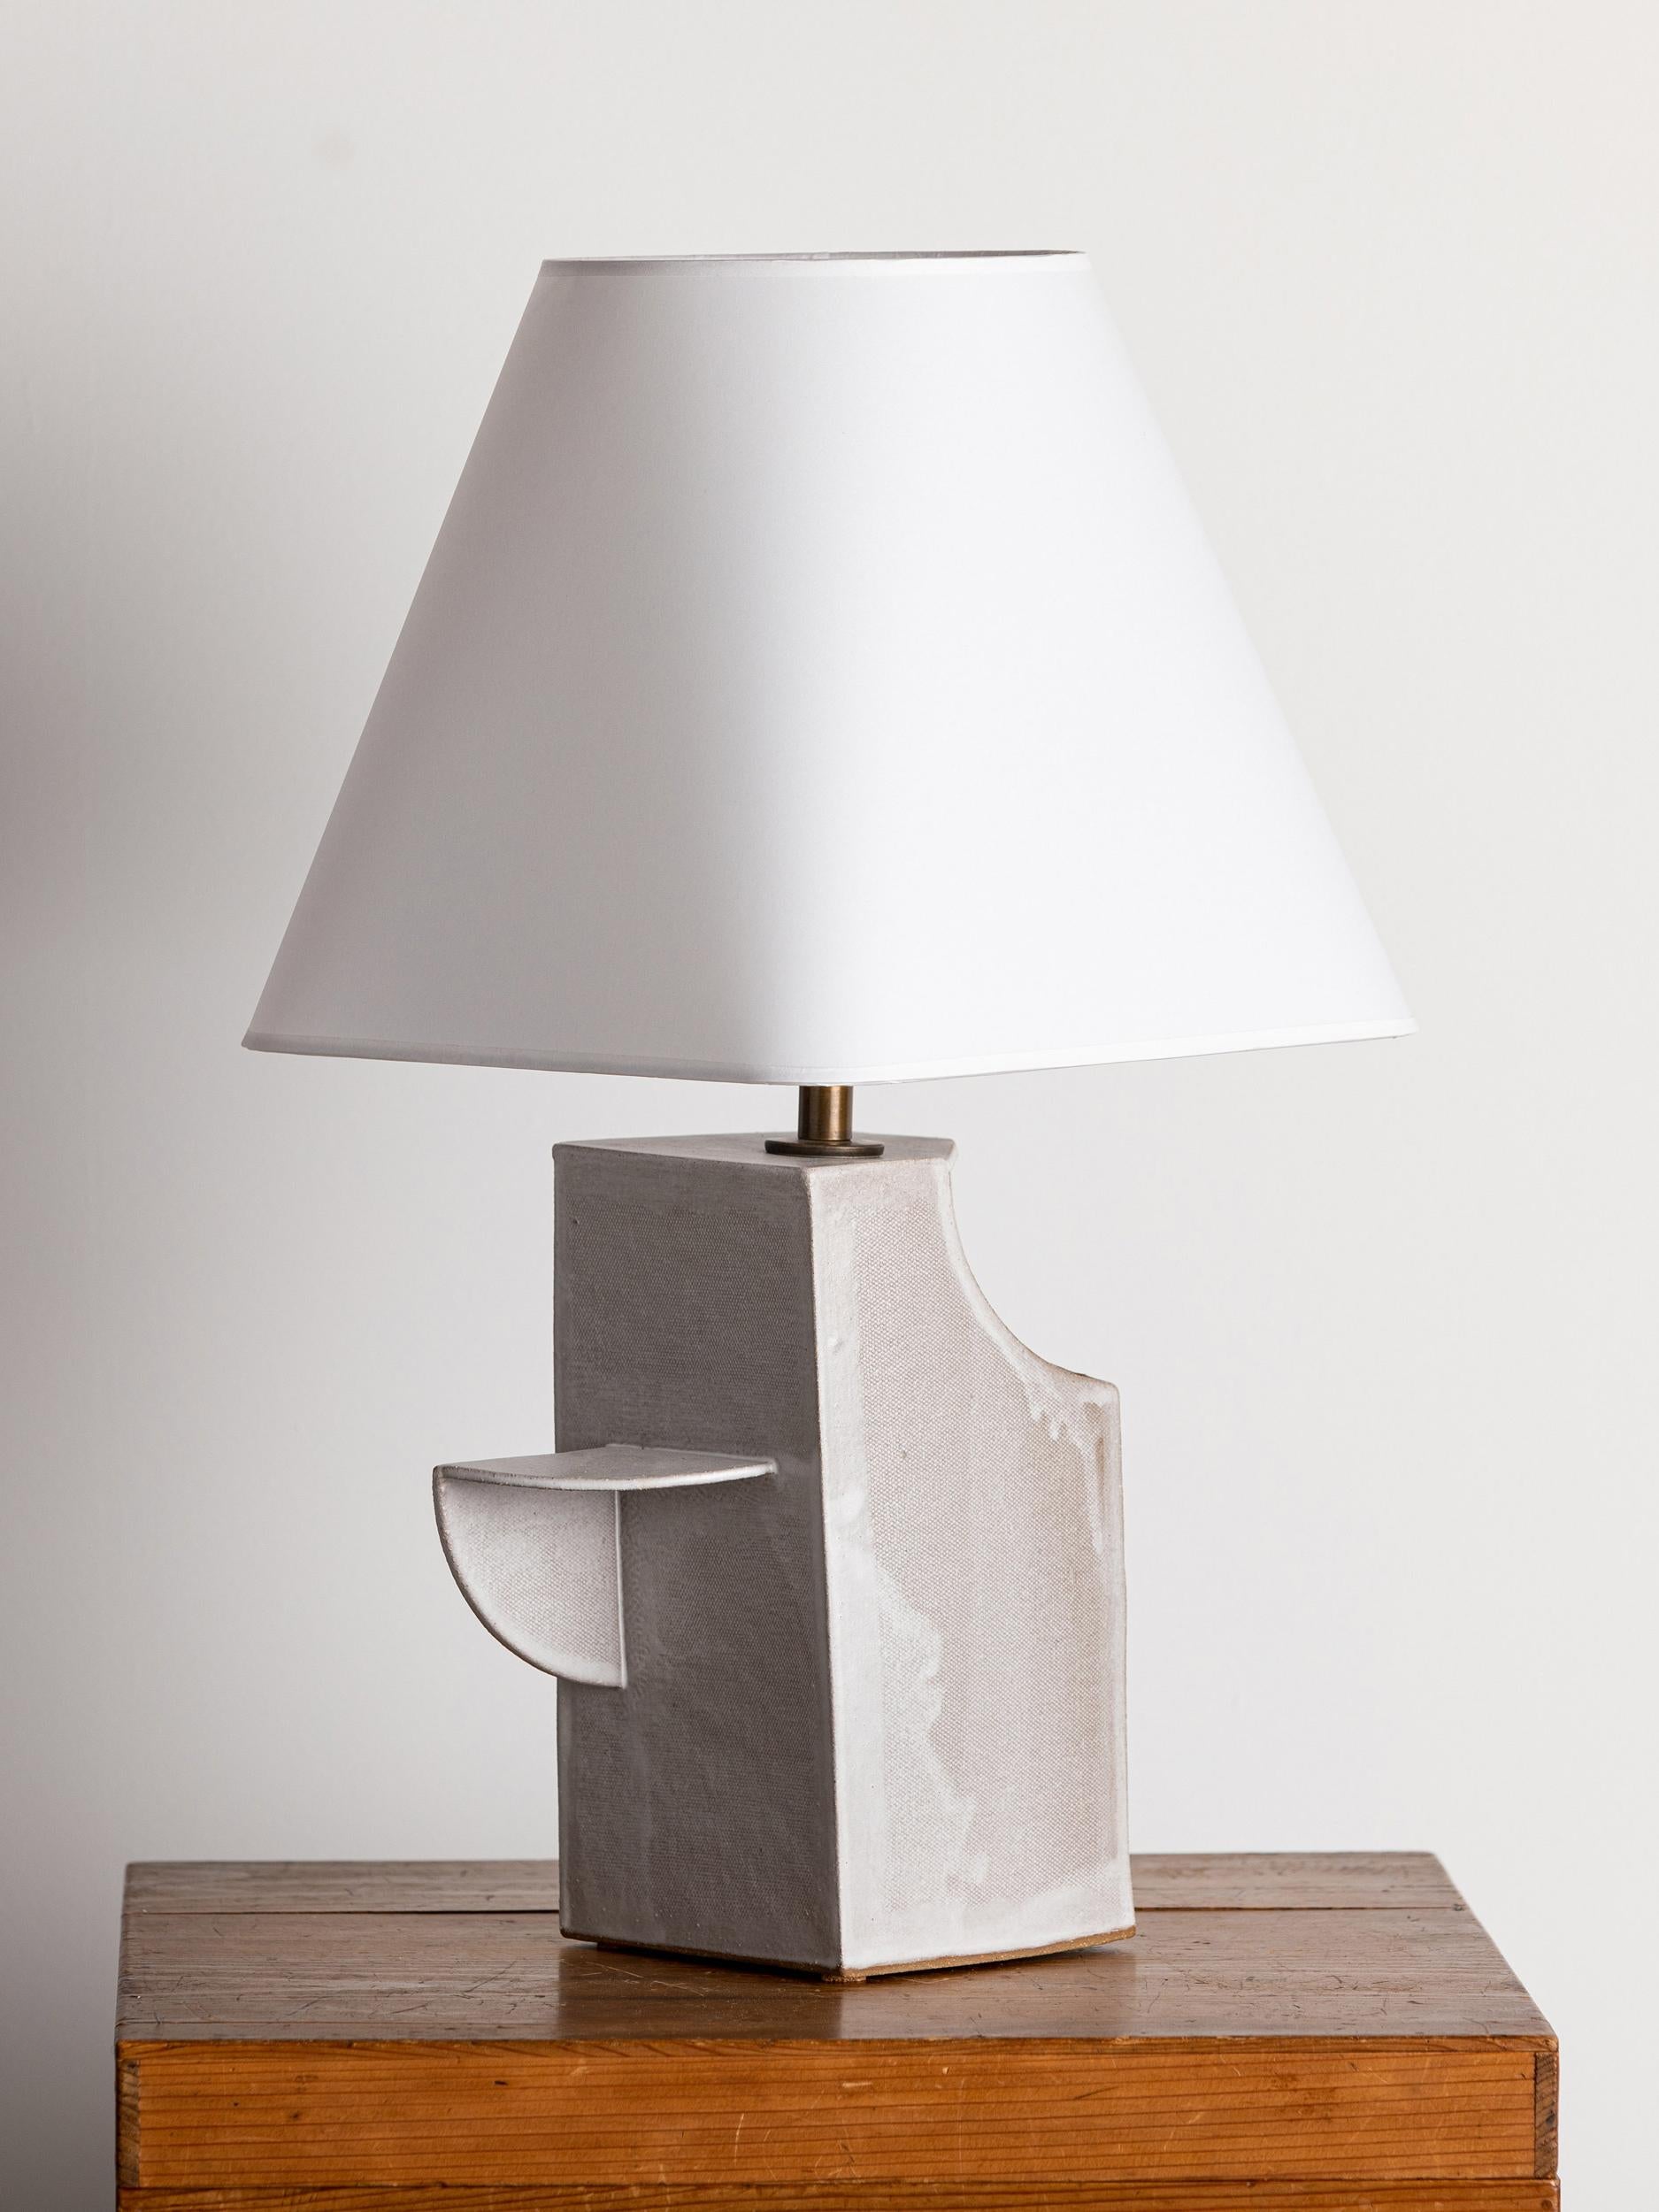 Our stoneware Totem lamp is handcrafted using slab-construction techniques.

Finish

- Dipped glaze, pictured in parchment 
- Antique brass fittings
- Twisted black-cloth cord
- Full-range dimmer socket
- Vellum shade

Bulb

60-watt